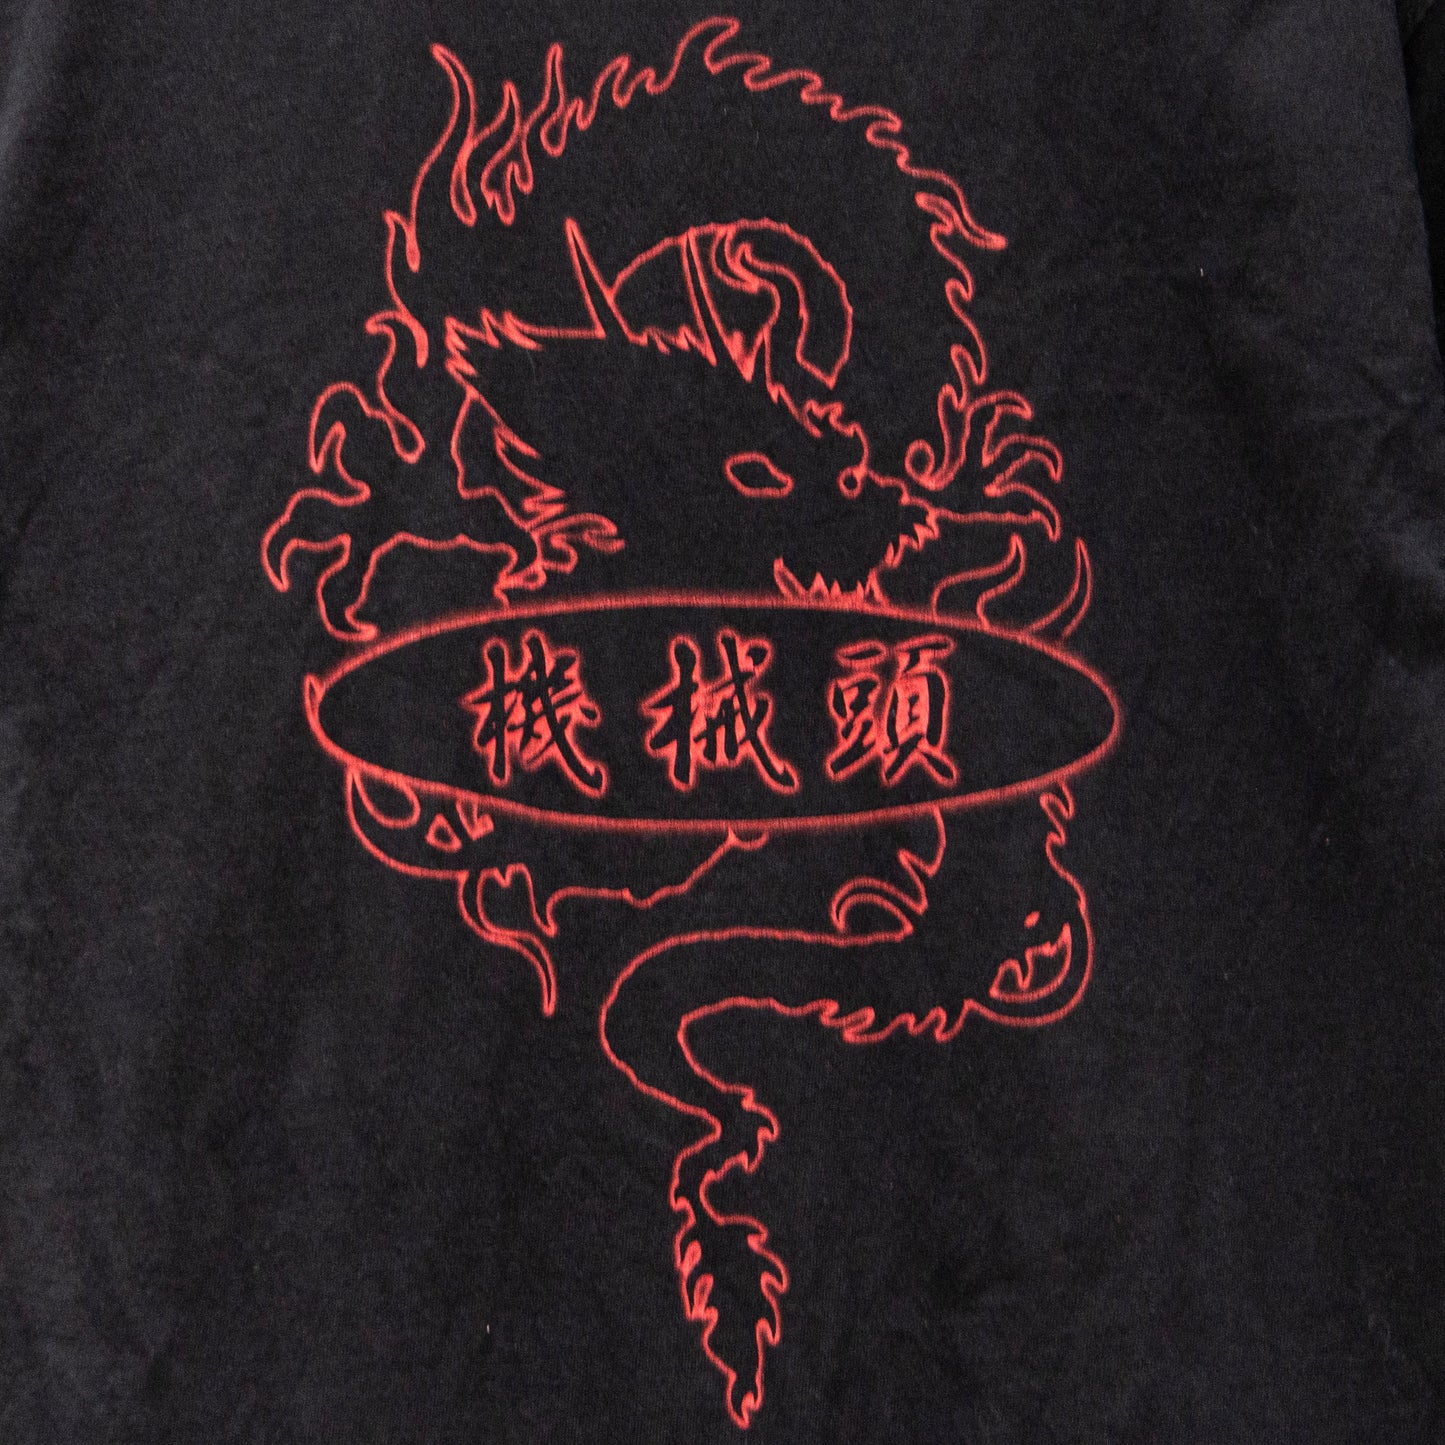 2000 Machine Head 'Year of the Dragon' T-Shirt Large